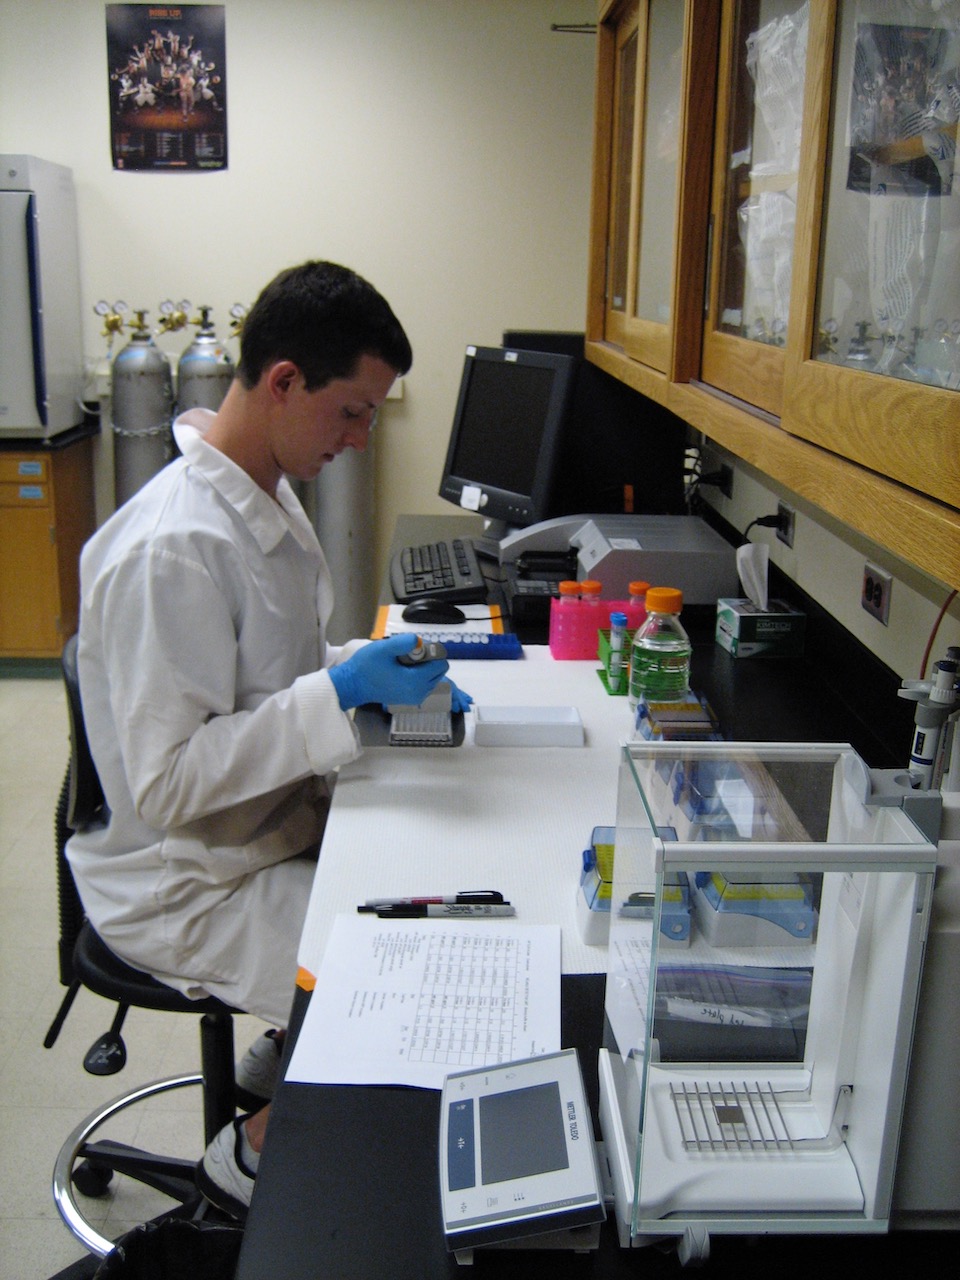 Brendon Smith in the Bioacoustics Research Lab at the University of Illinois at Urbana-Champaign